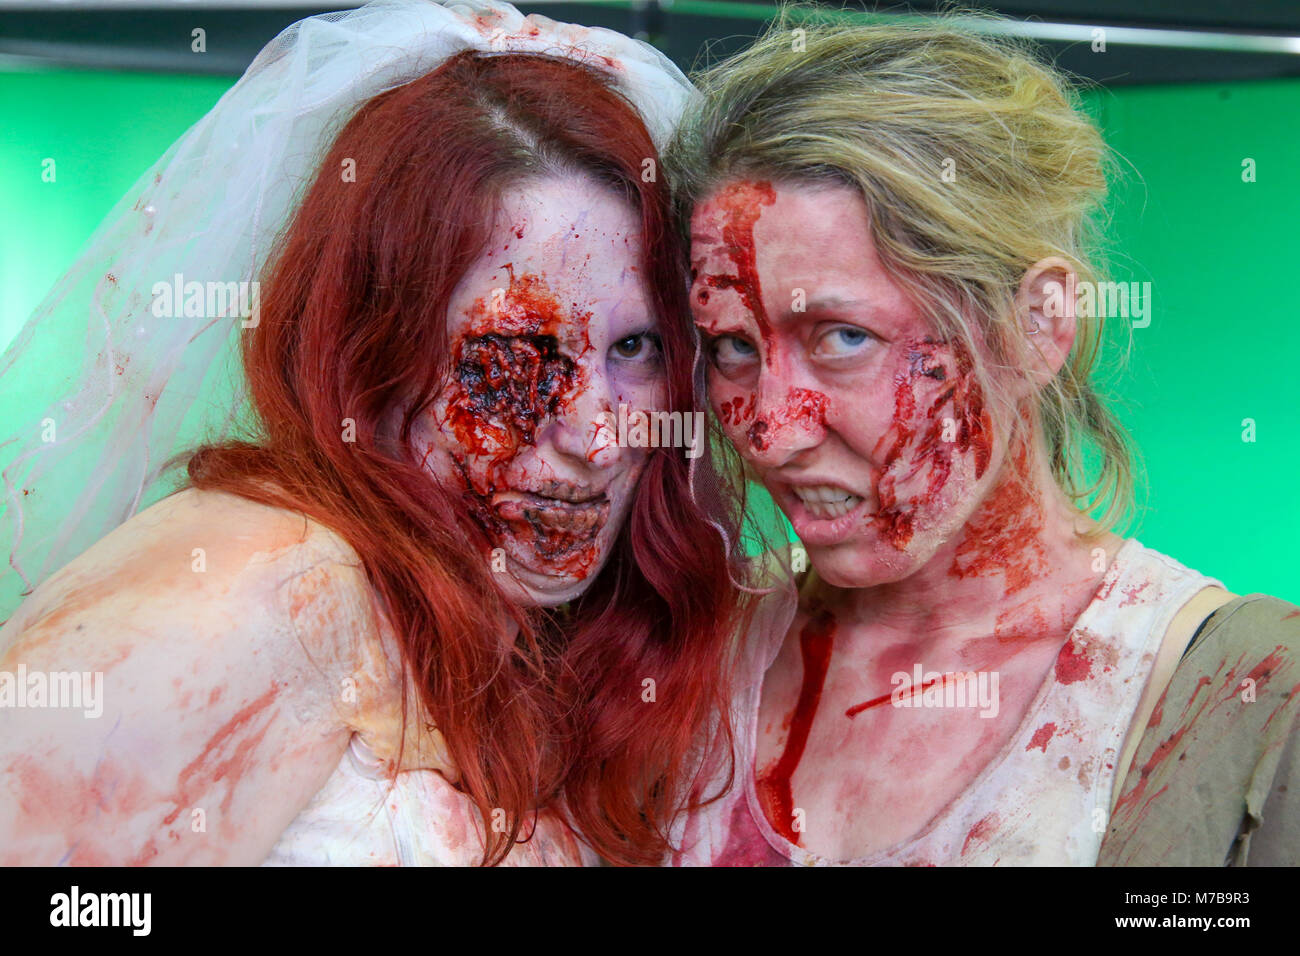 London UK 10 March 2018  Walker Stalker  con held at the London Olympia. A huge crowd come to be frightened and meet the stars of the horror world, with lots of special effects and scary make up@Paul Quezada Neiman/Alamy Live News Stock Photo